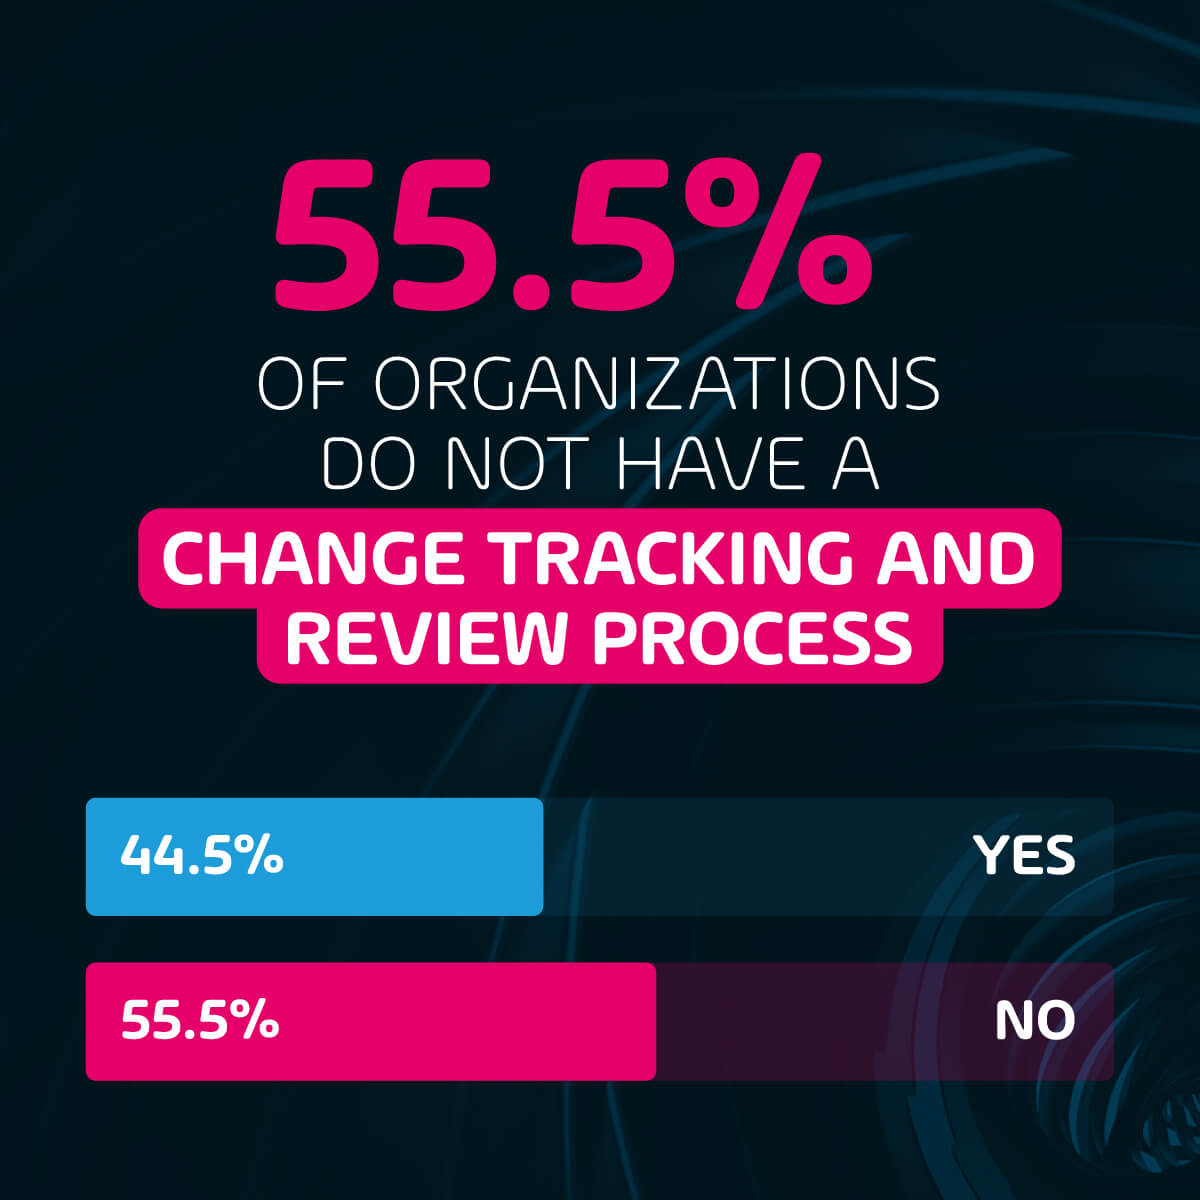 55.5% of organizations do not have a change tracking and review process.